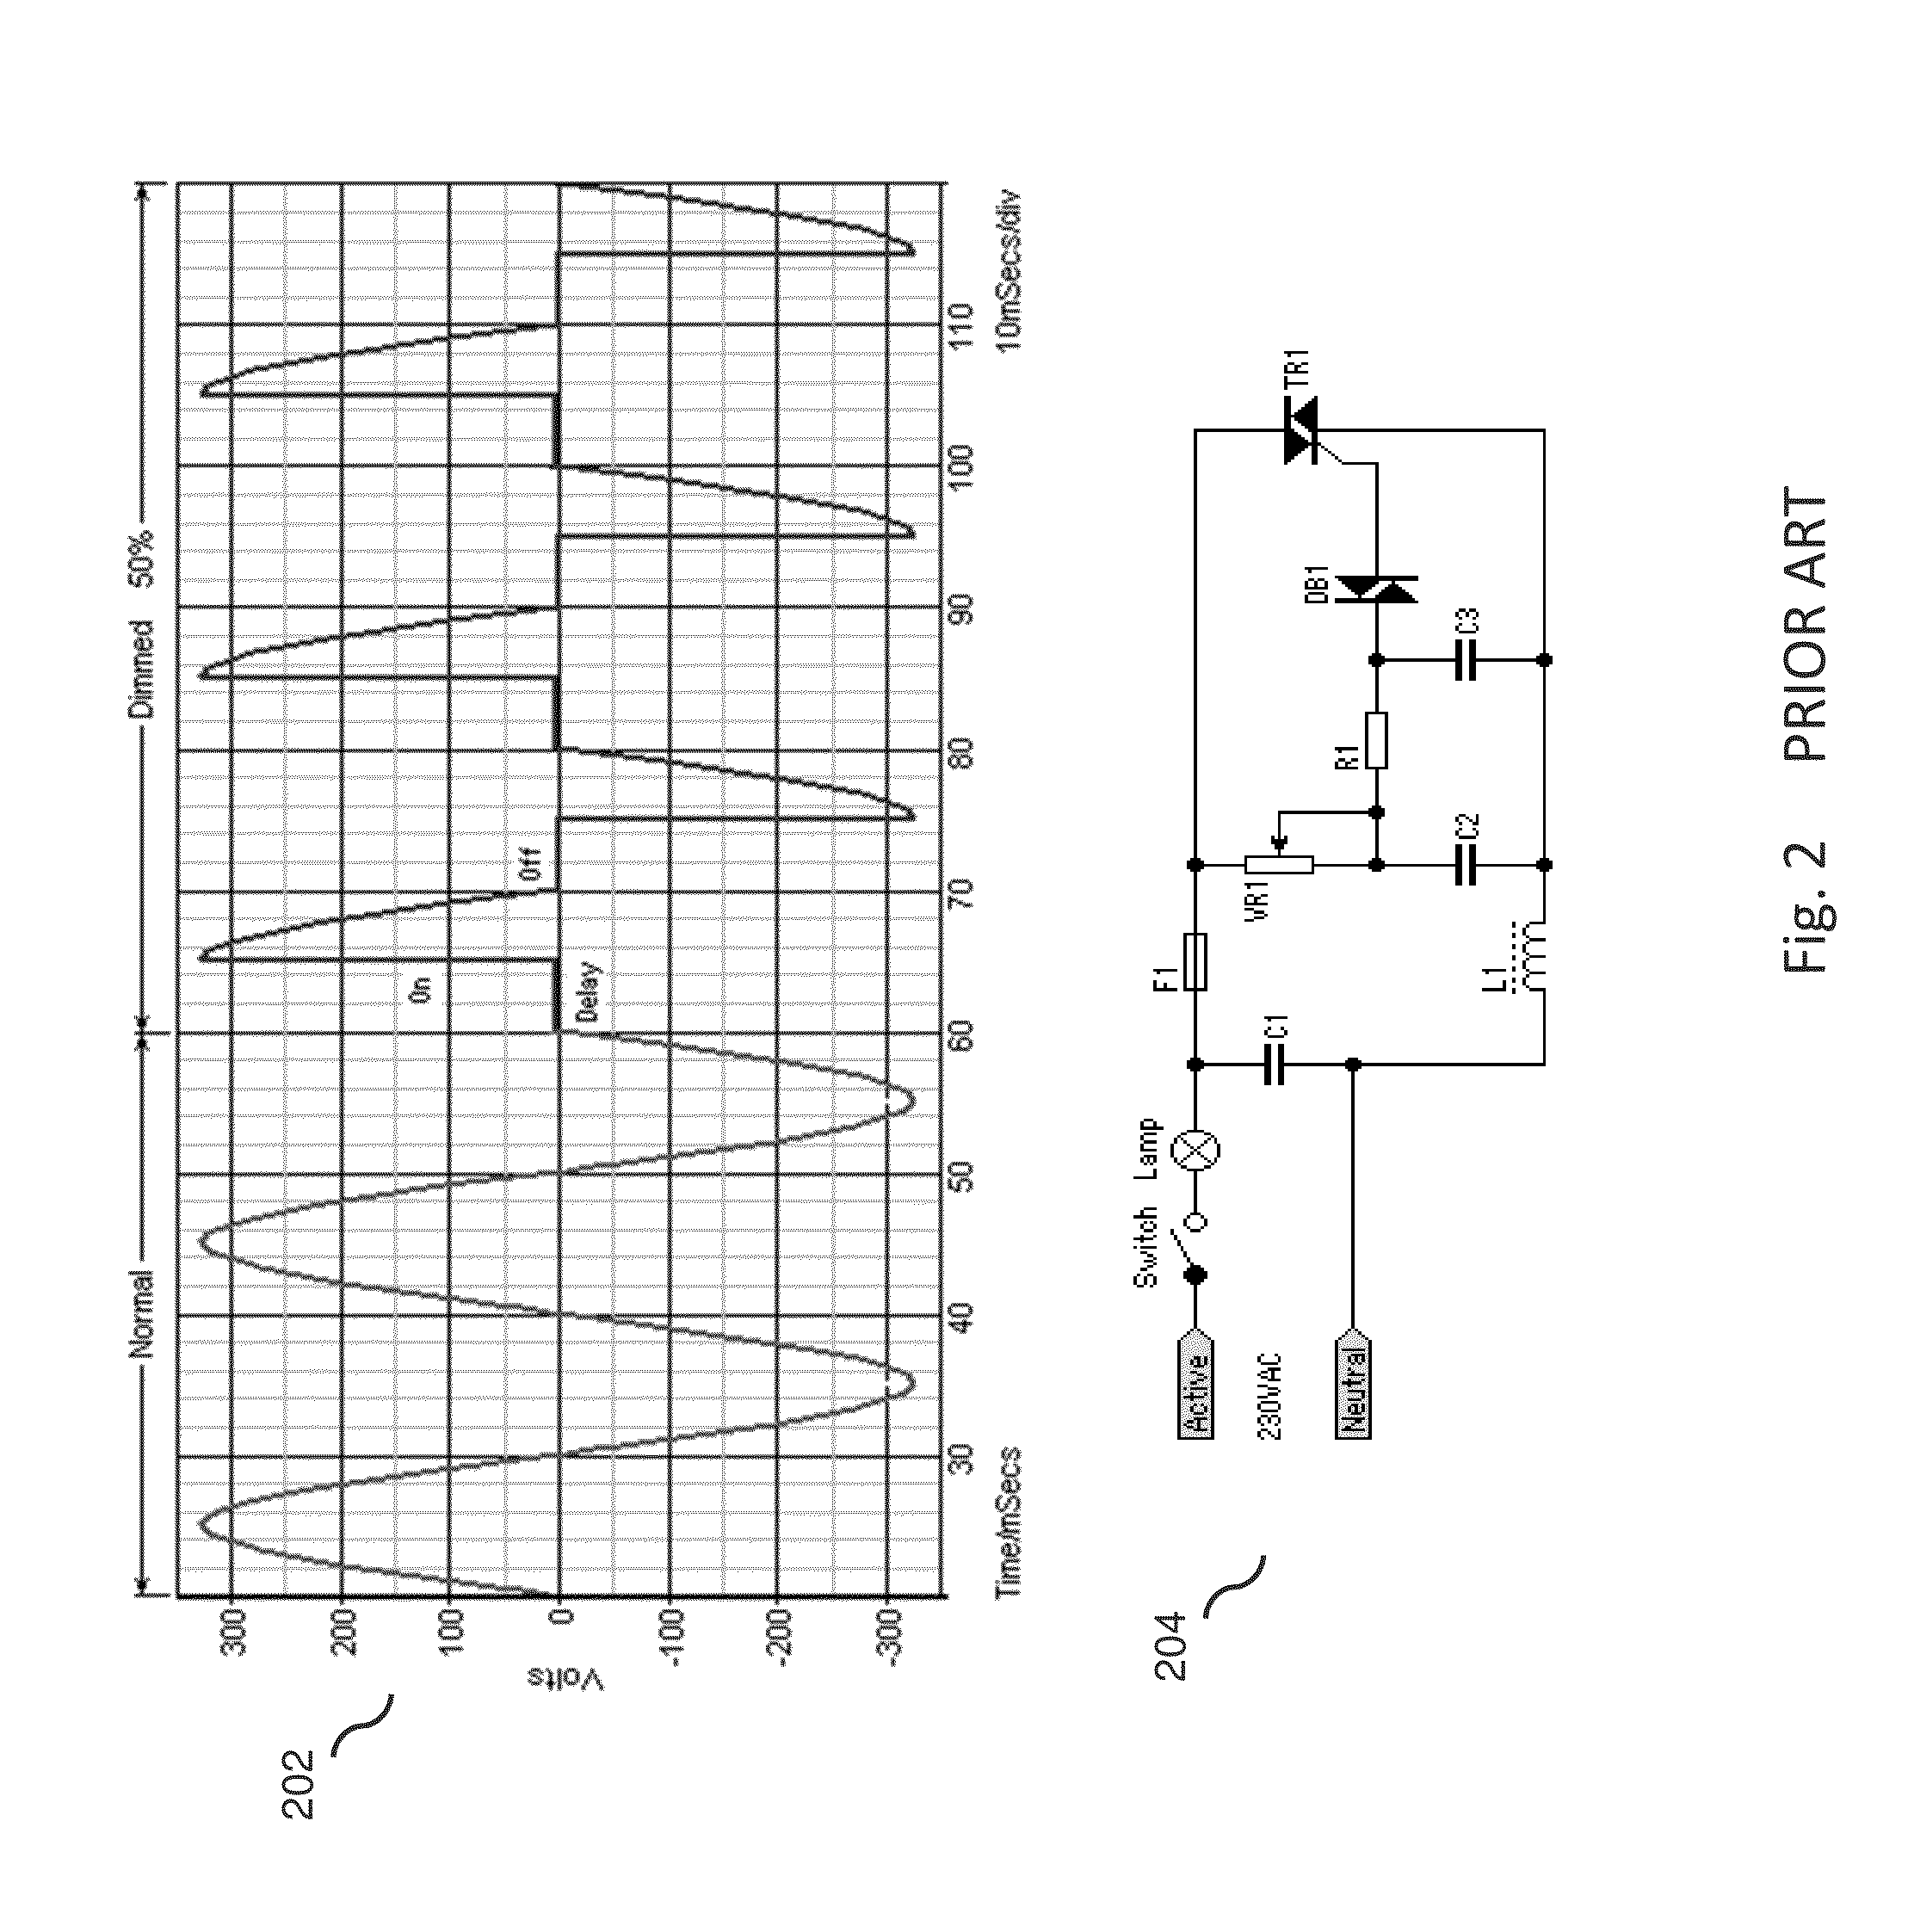 Systems and methods for dimming of a light source